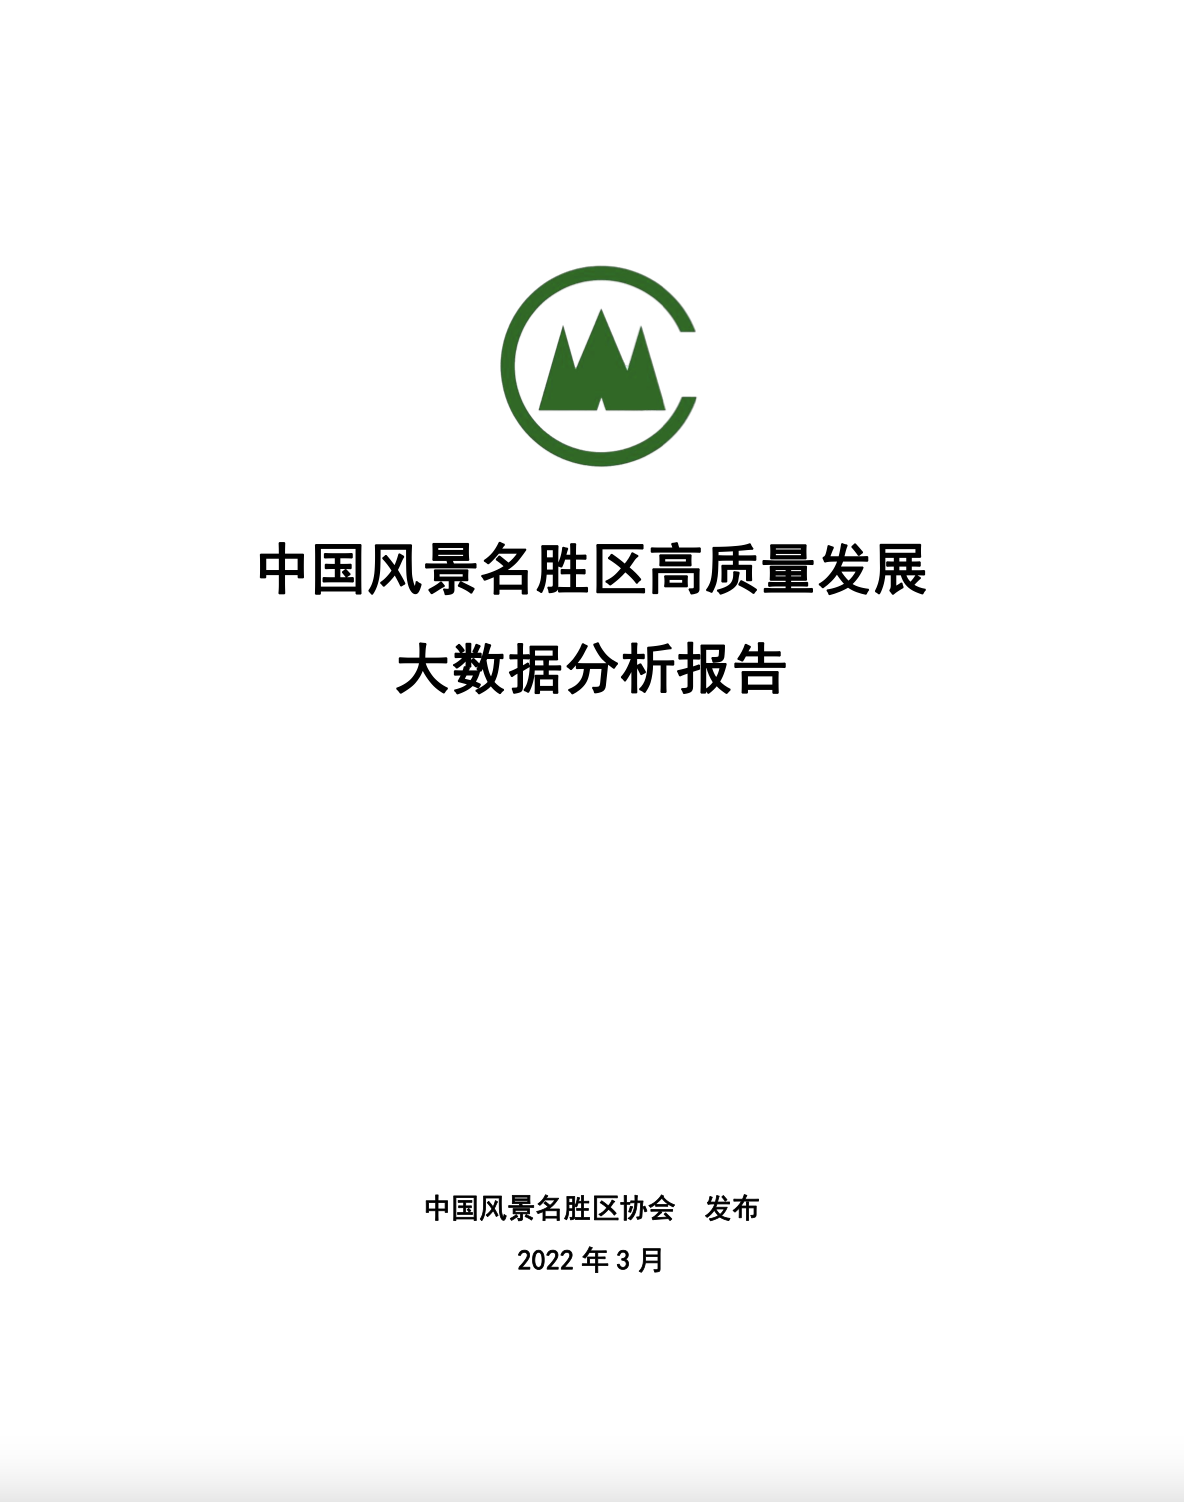 Big Data Analysis Report on High-quality Development of Chinese National Parks and Scenic Sites